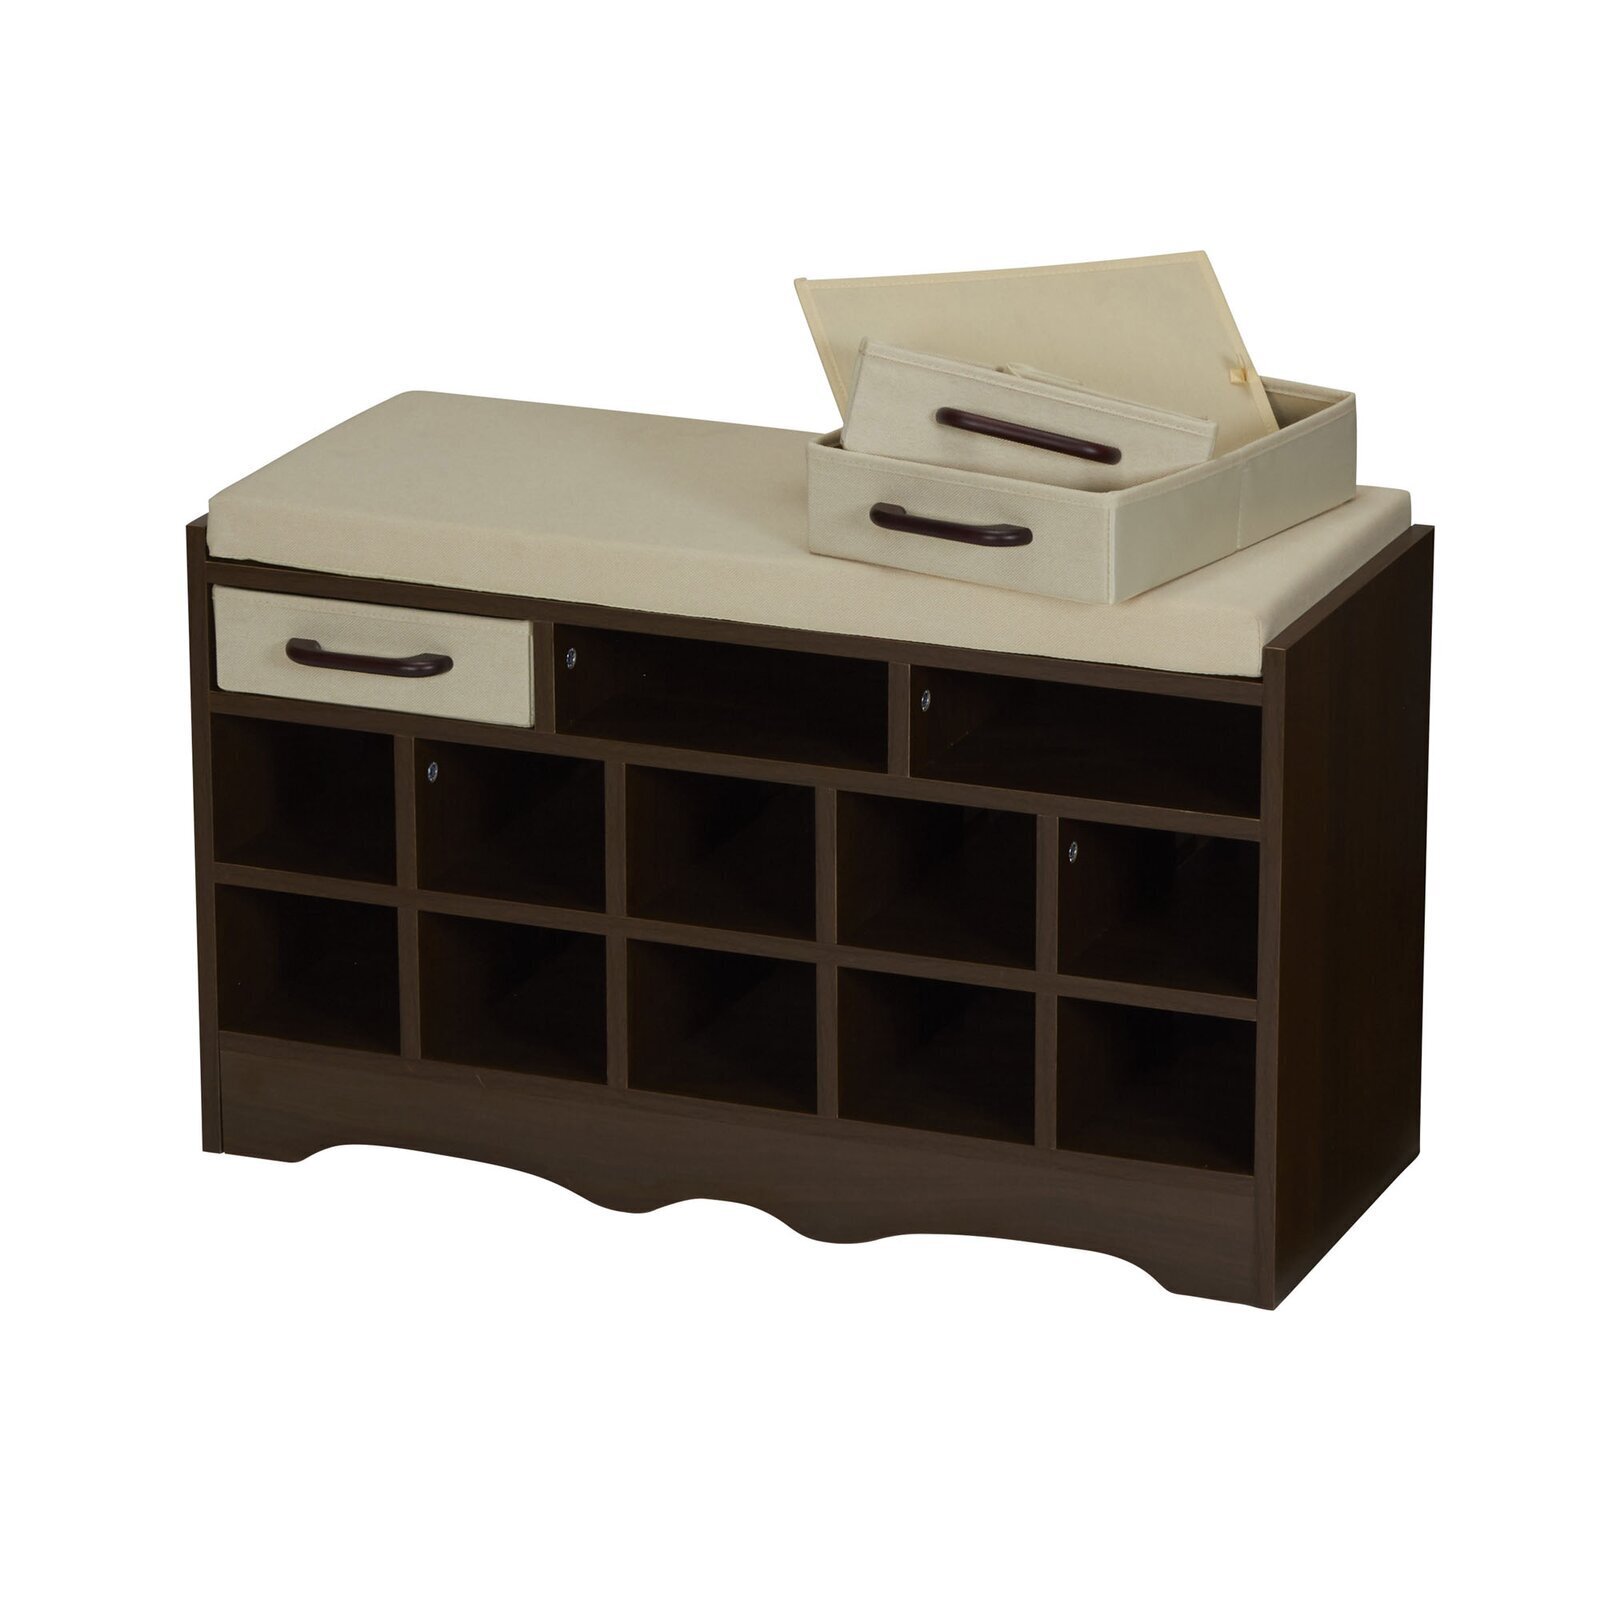 Storage Bench with Cubby Holes